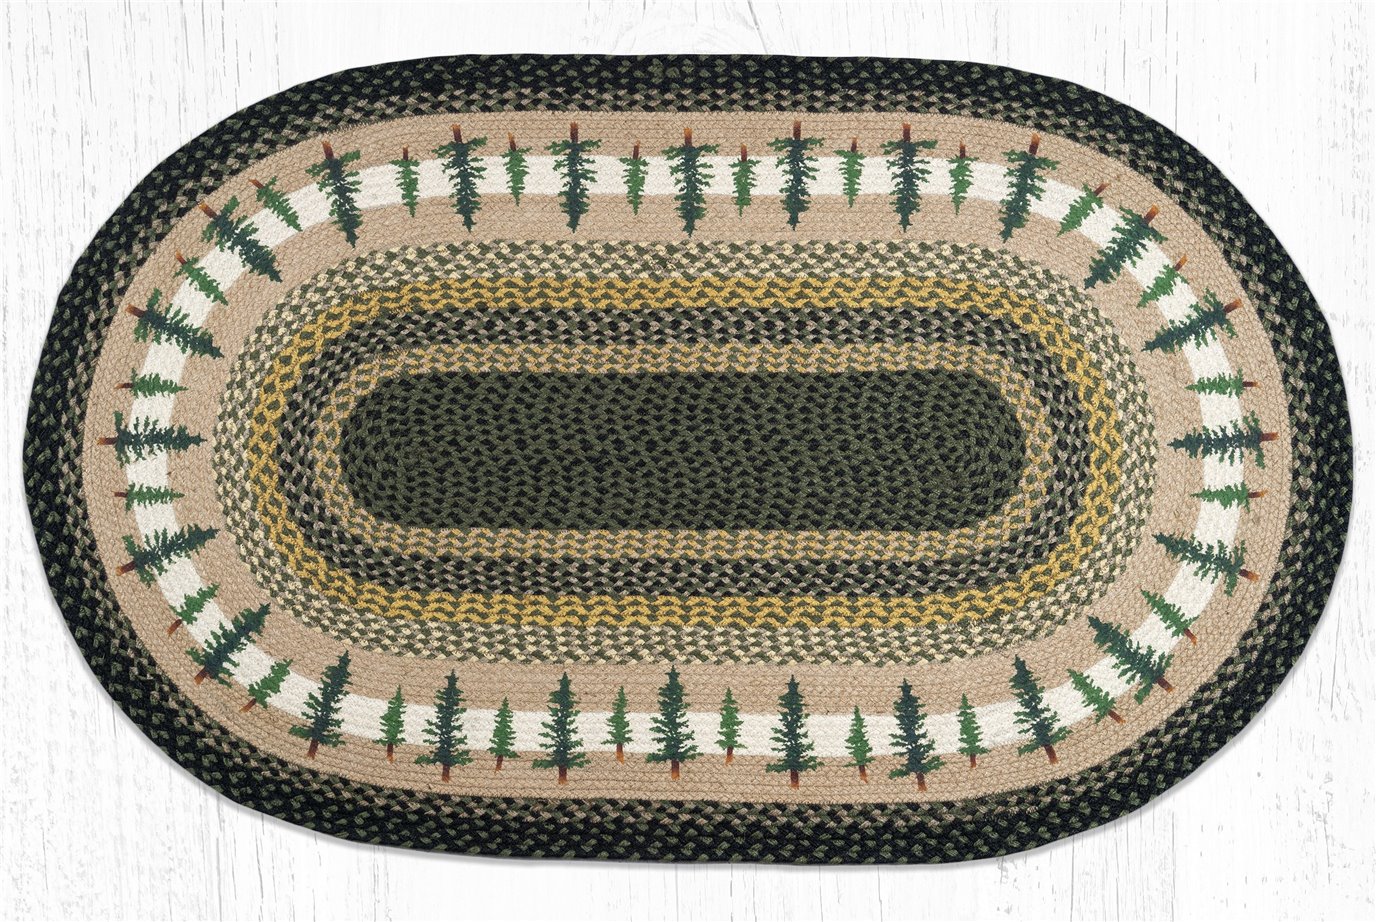 Tall Timbers Oval Braided Rug 3'x5' by Earth Rugs